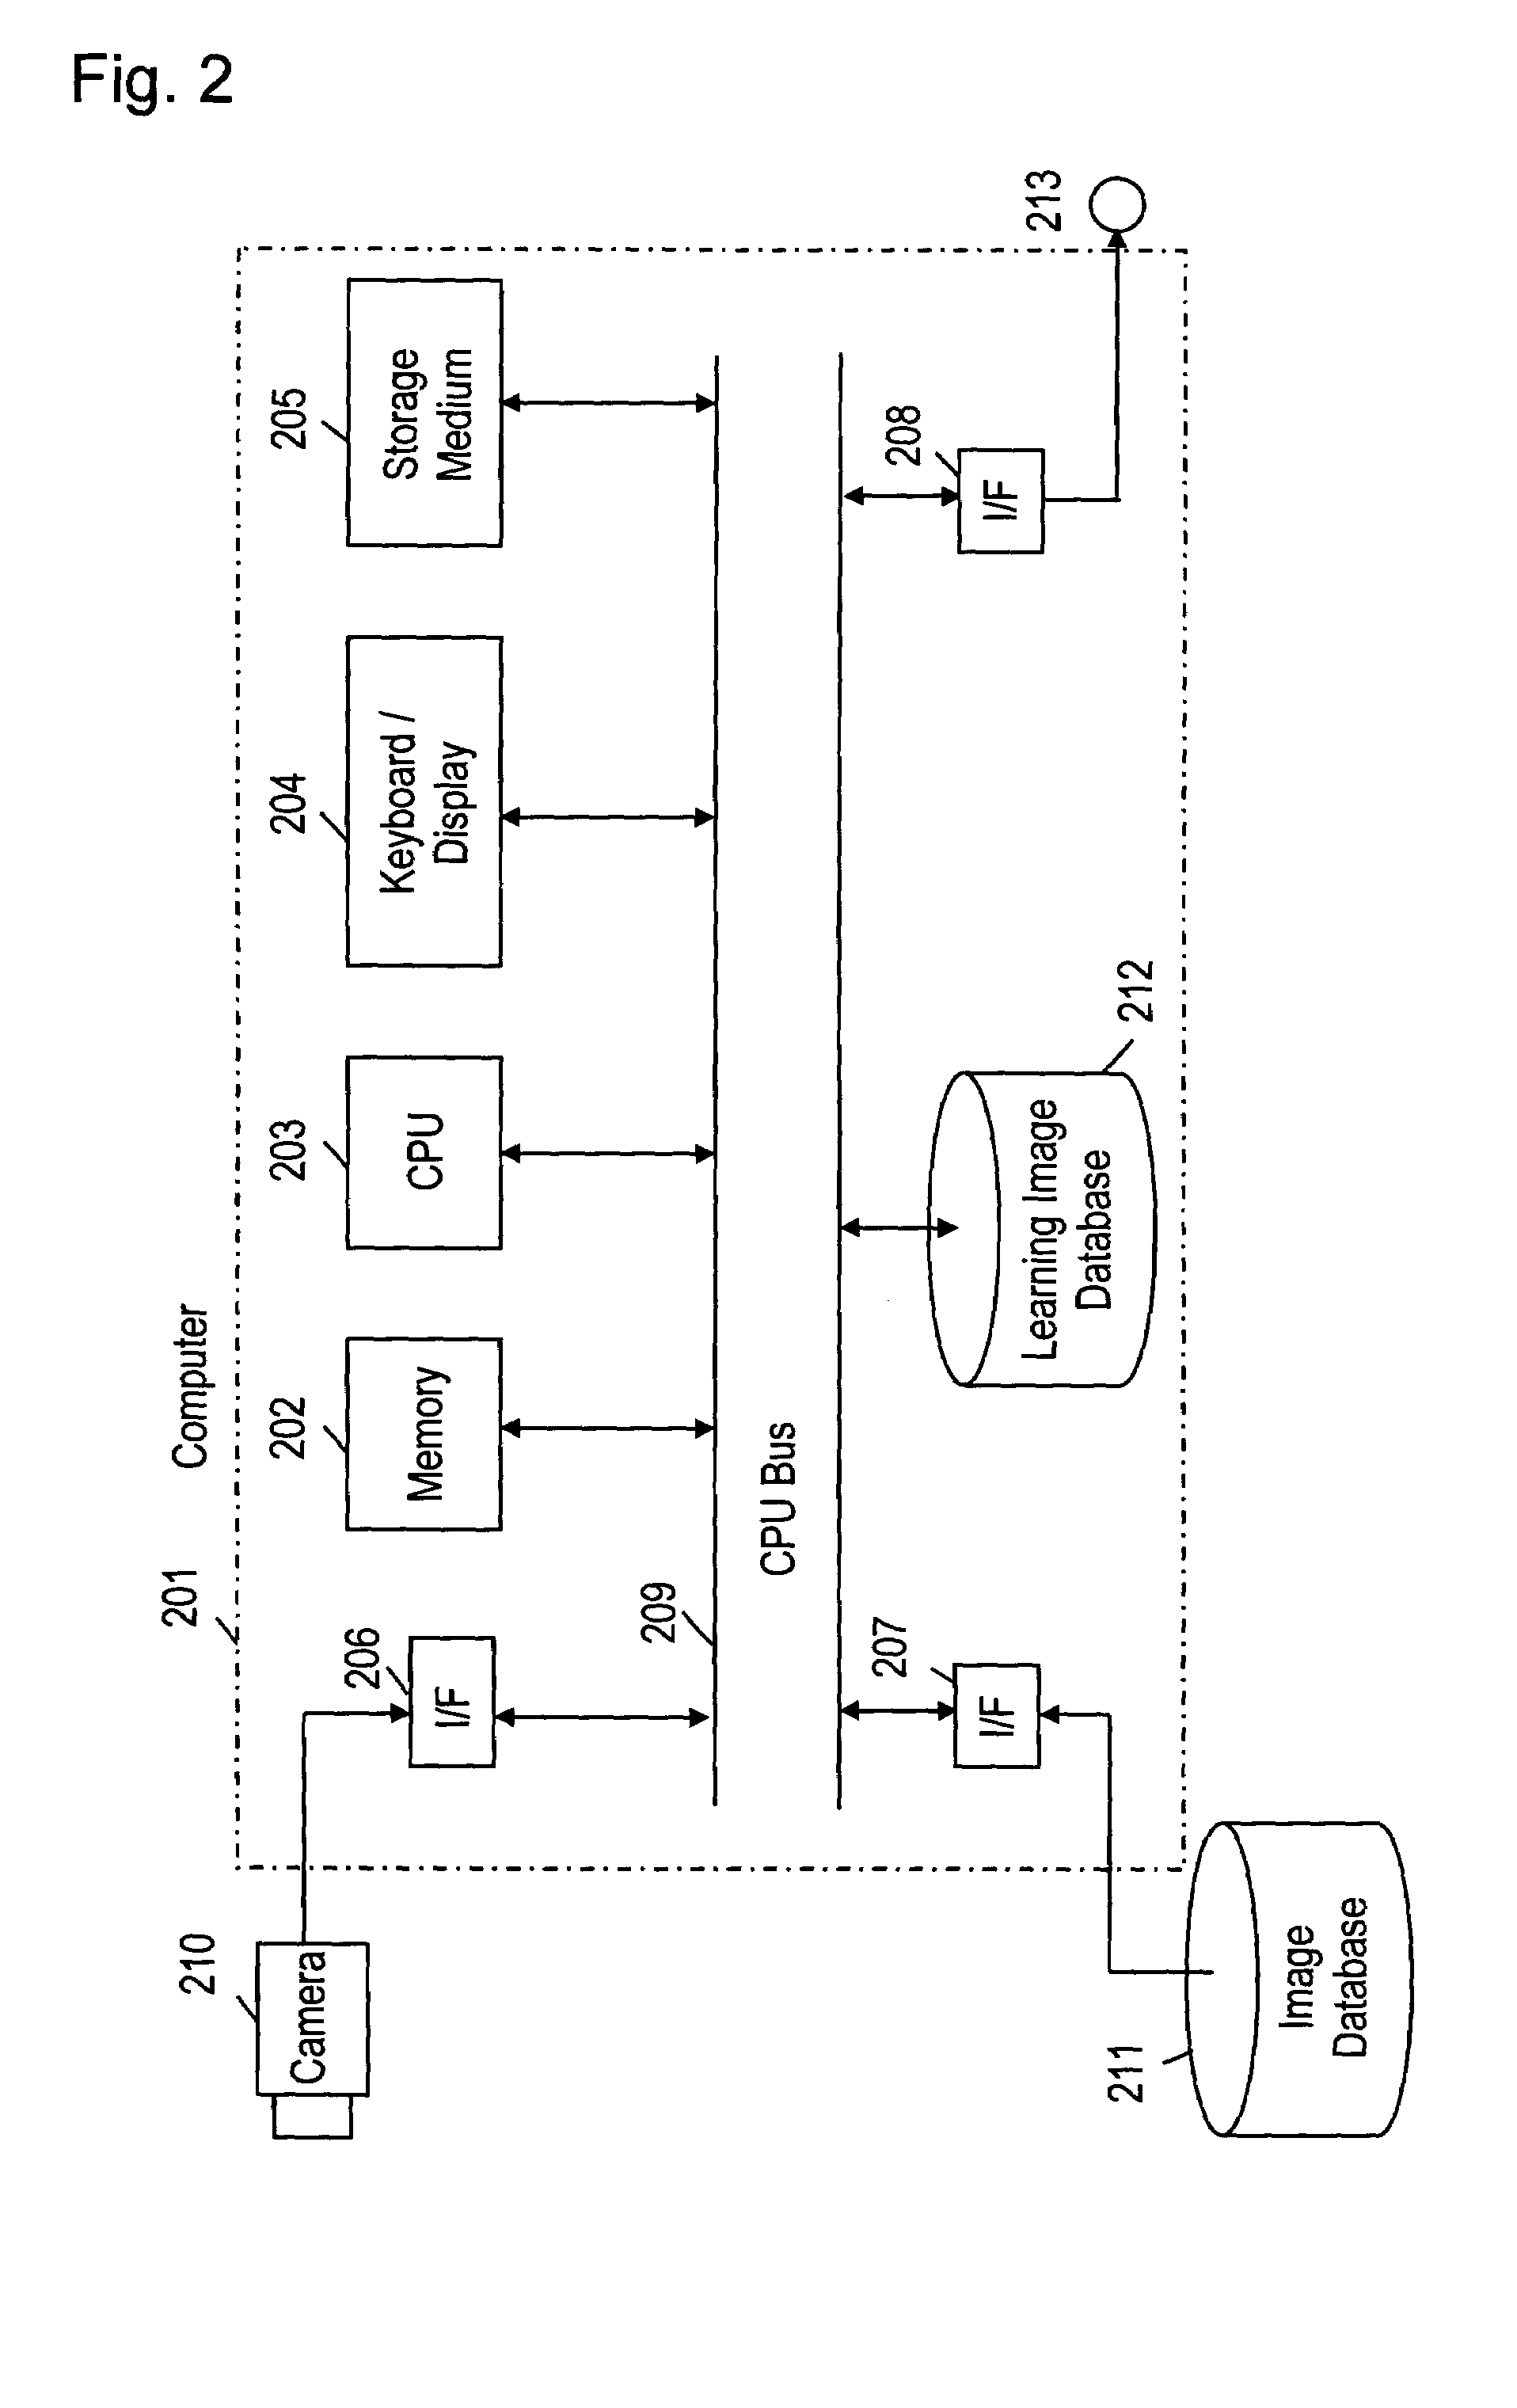 Apparatus and method for image recognition